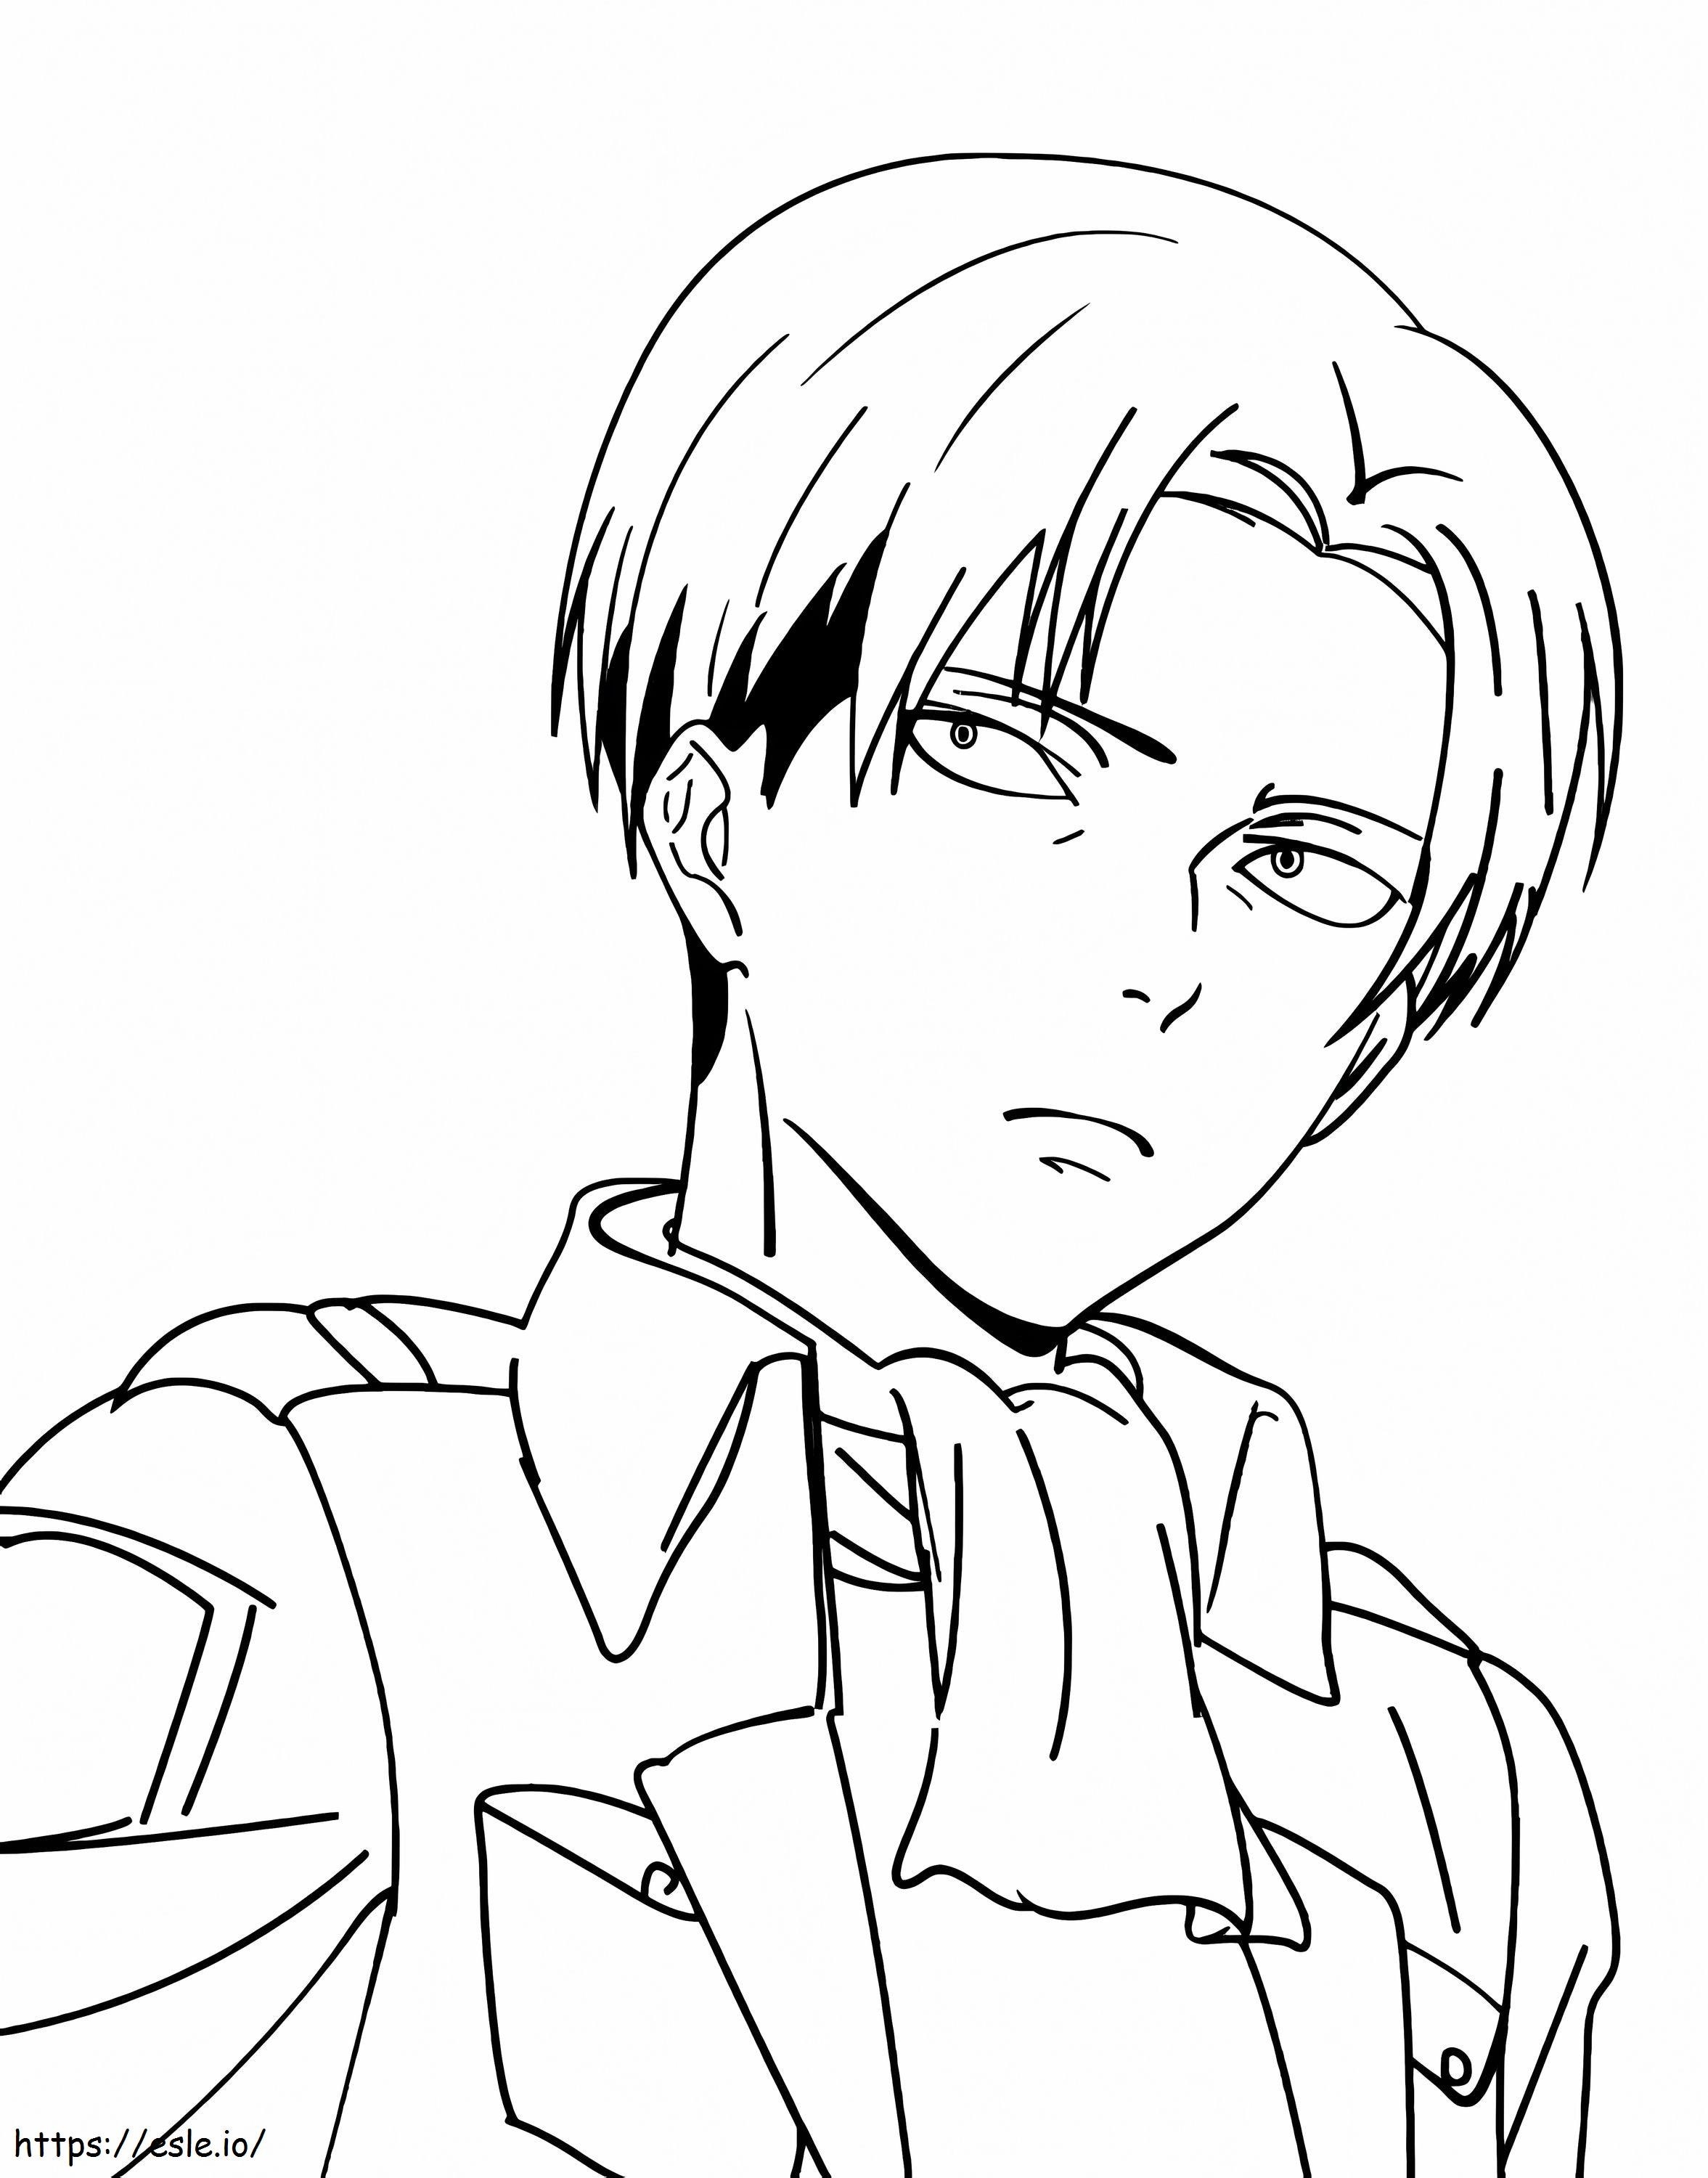 Cool Levi Ackerman coloring page